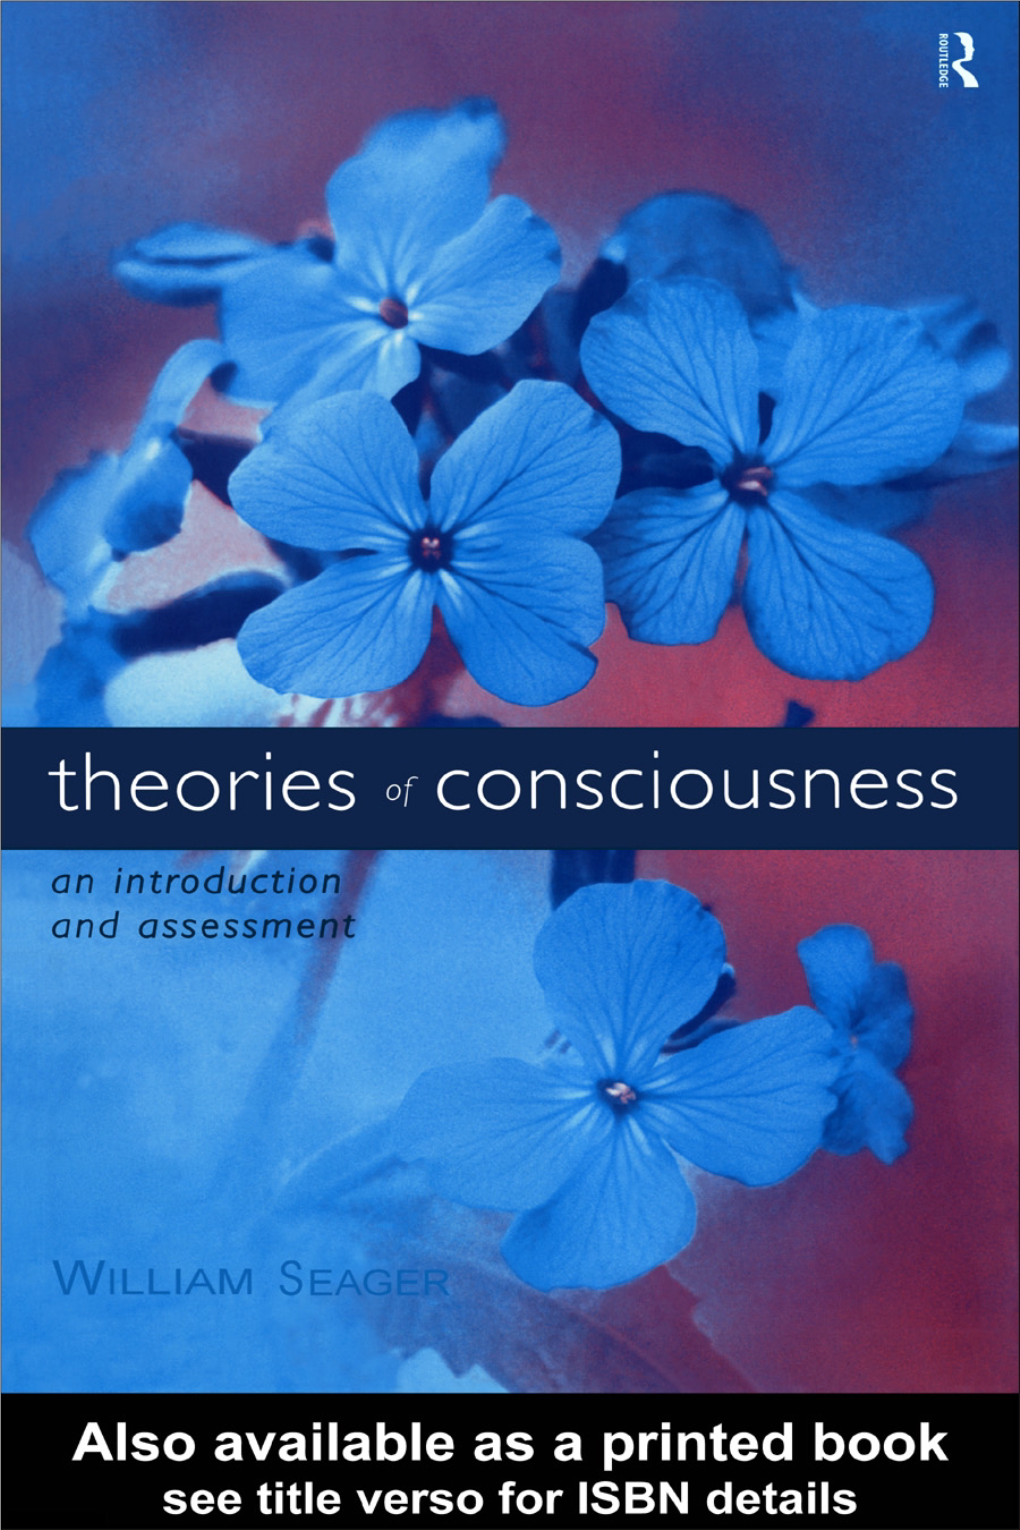 Theories of Consciousness: an Introduction and Assessment/William Seager